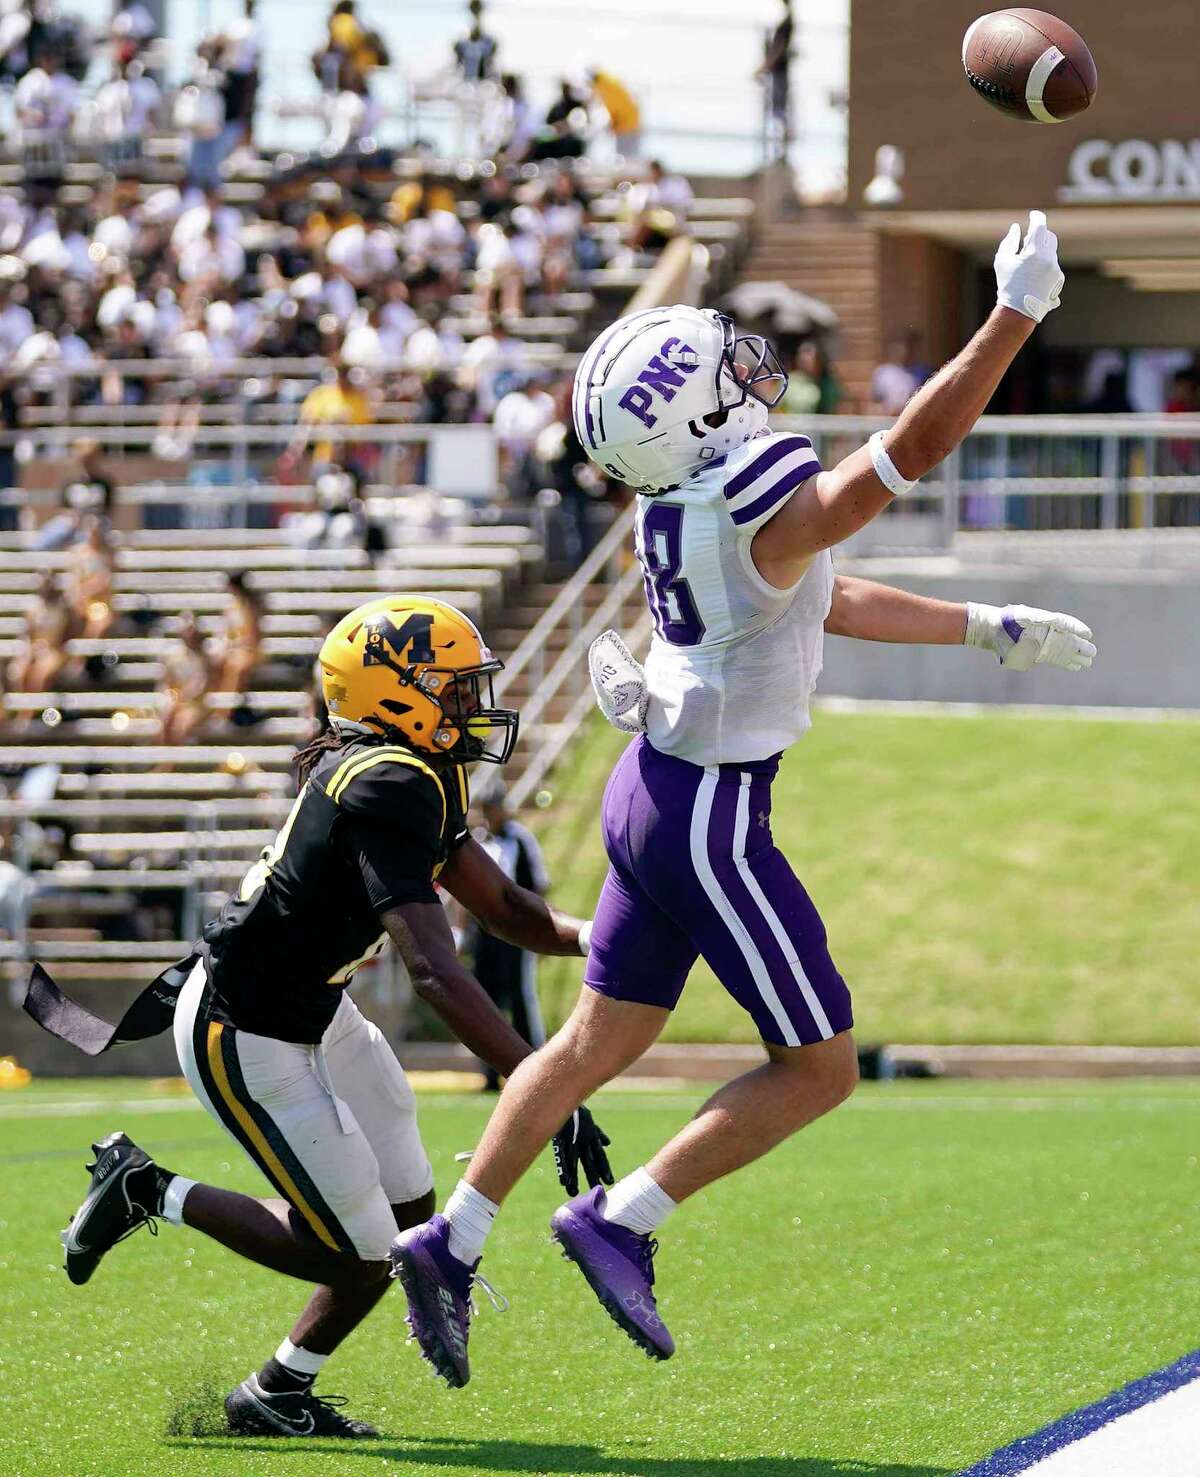 Port Neches-Groves wide receiver Chance Prosperie, right, misses a pass in the end zone as Marshall defensive back Ky Guillory defends during the first half of a high school football game, Saturday, Sept. 24, 2022, in Sugar Land, TX.